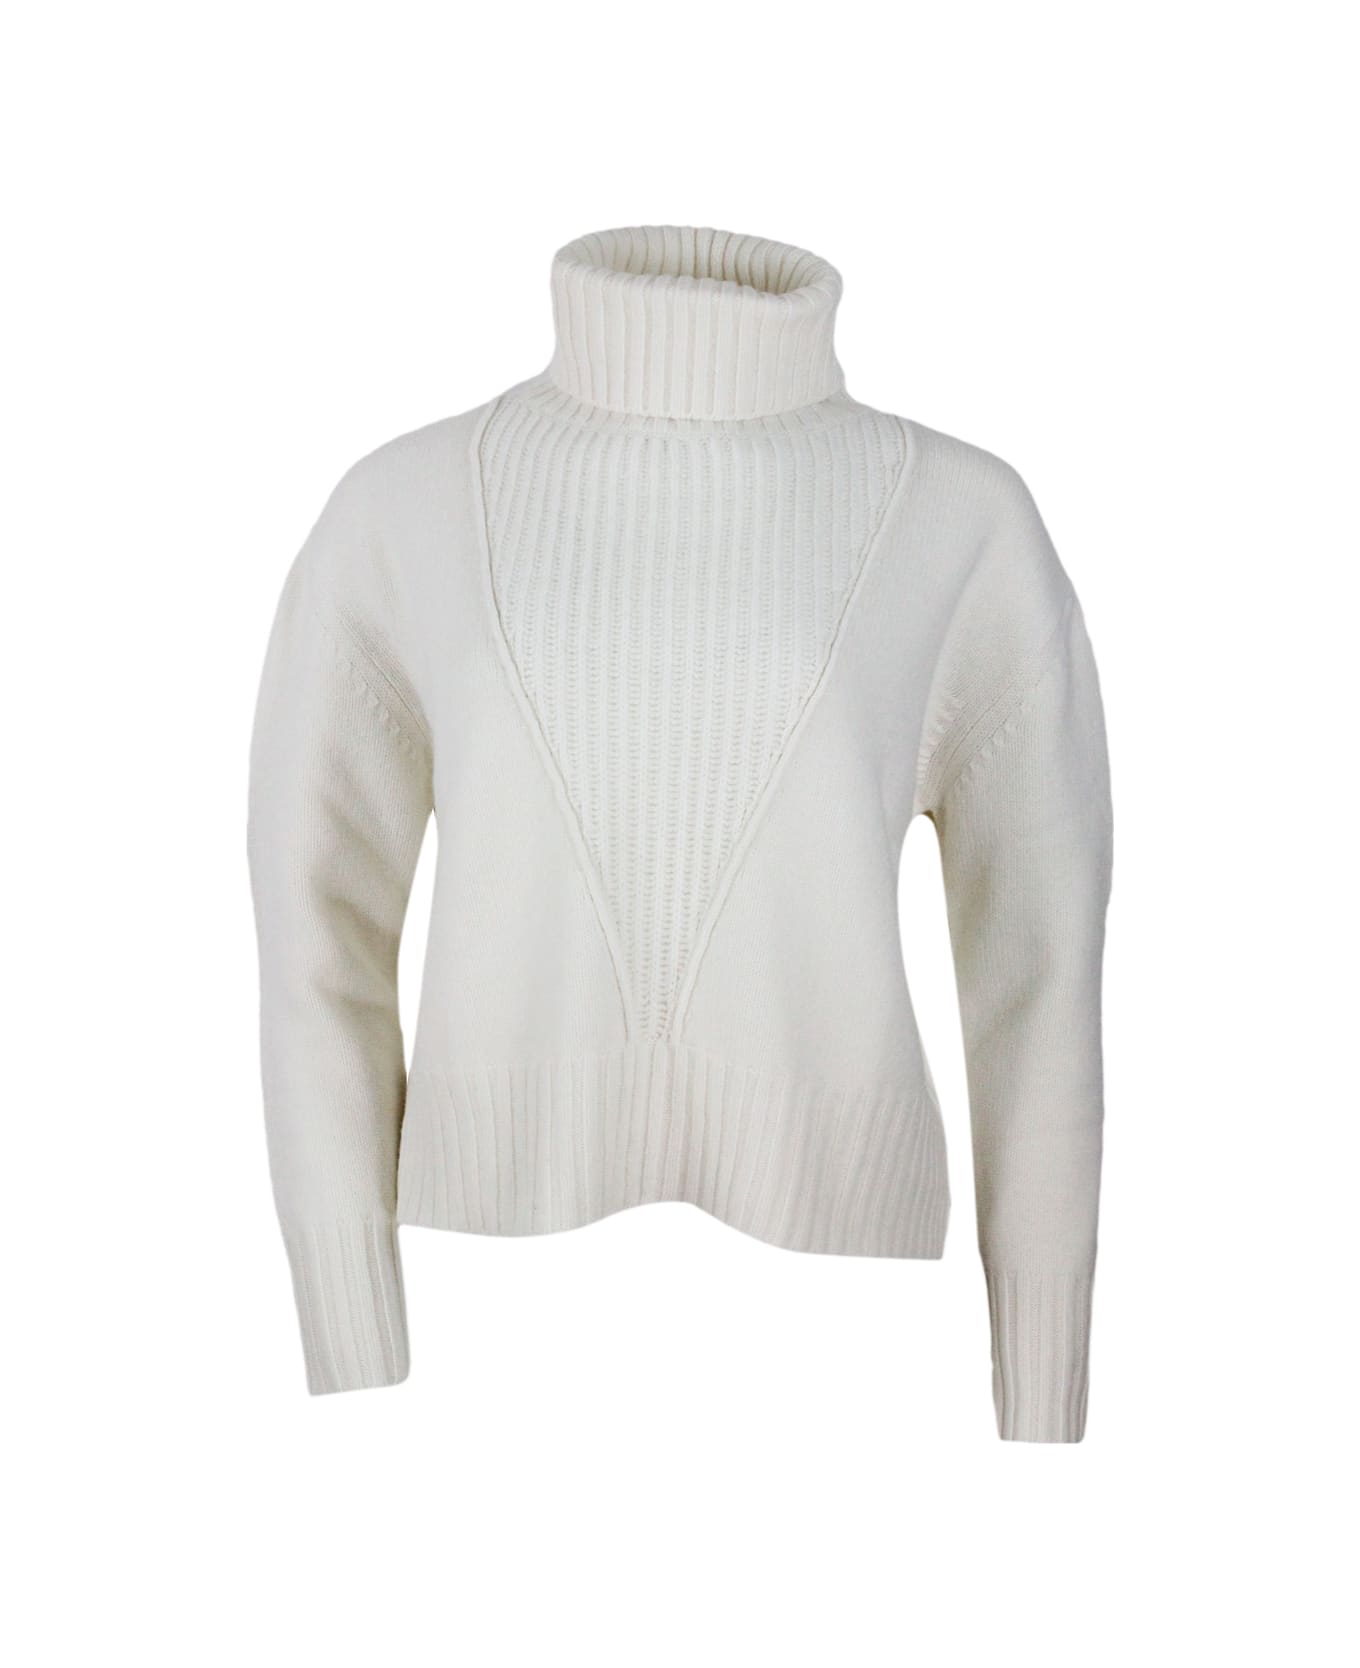 Lorena Antoniazzi Turtleneck Sweater Made Of Soft Wool, Cashmere And Silk With Three-dimensional Work On The Front - White